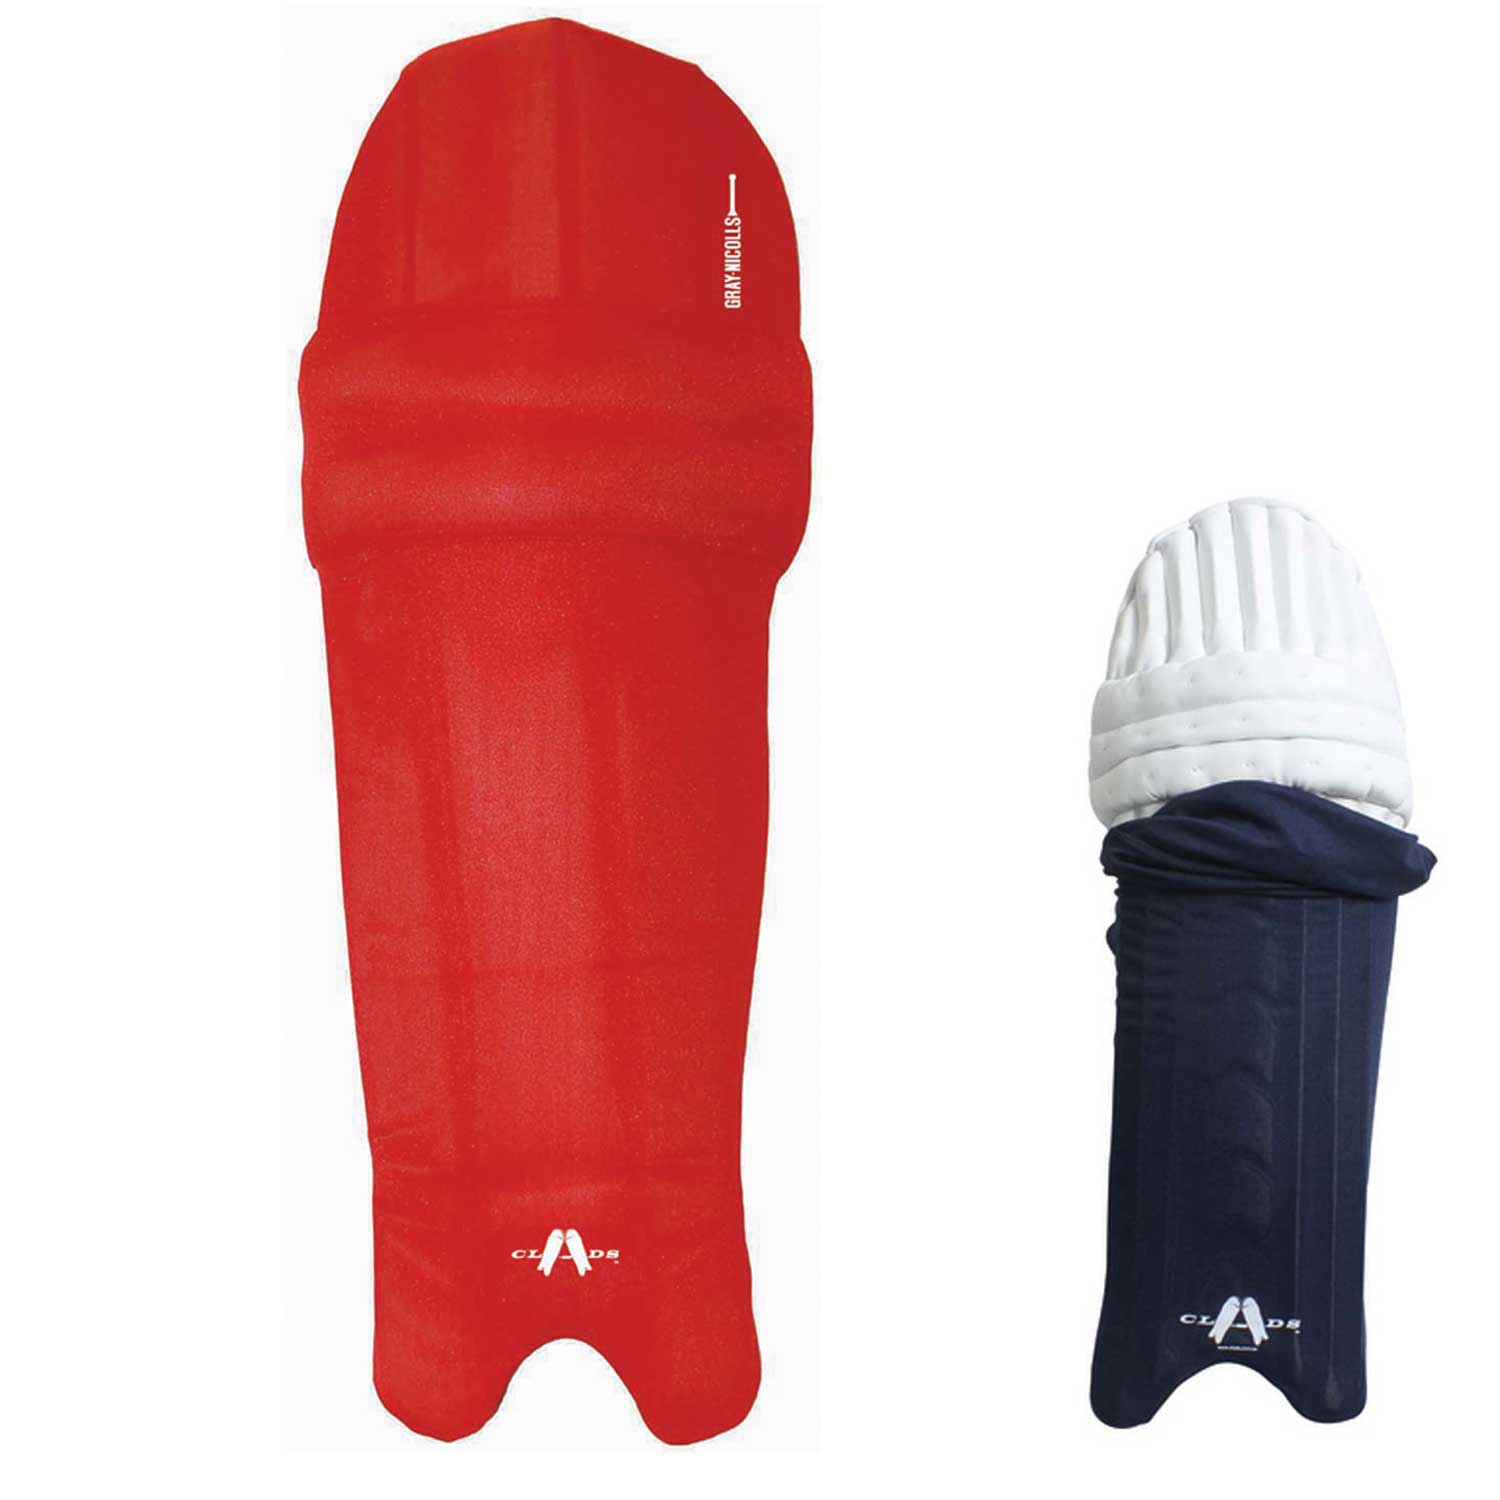 Cricket Pad Covers - Clads